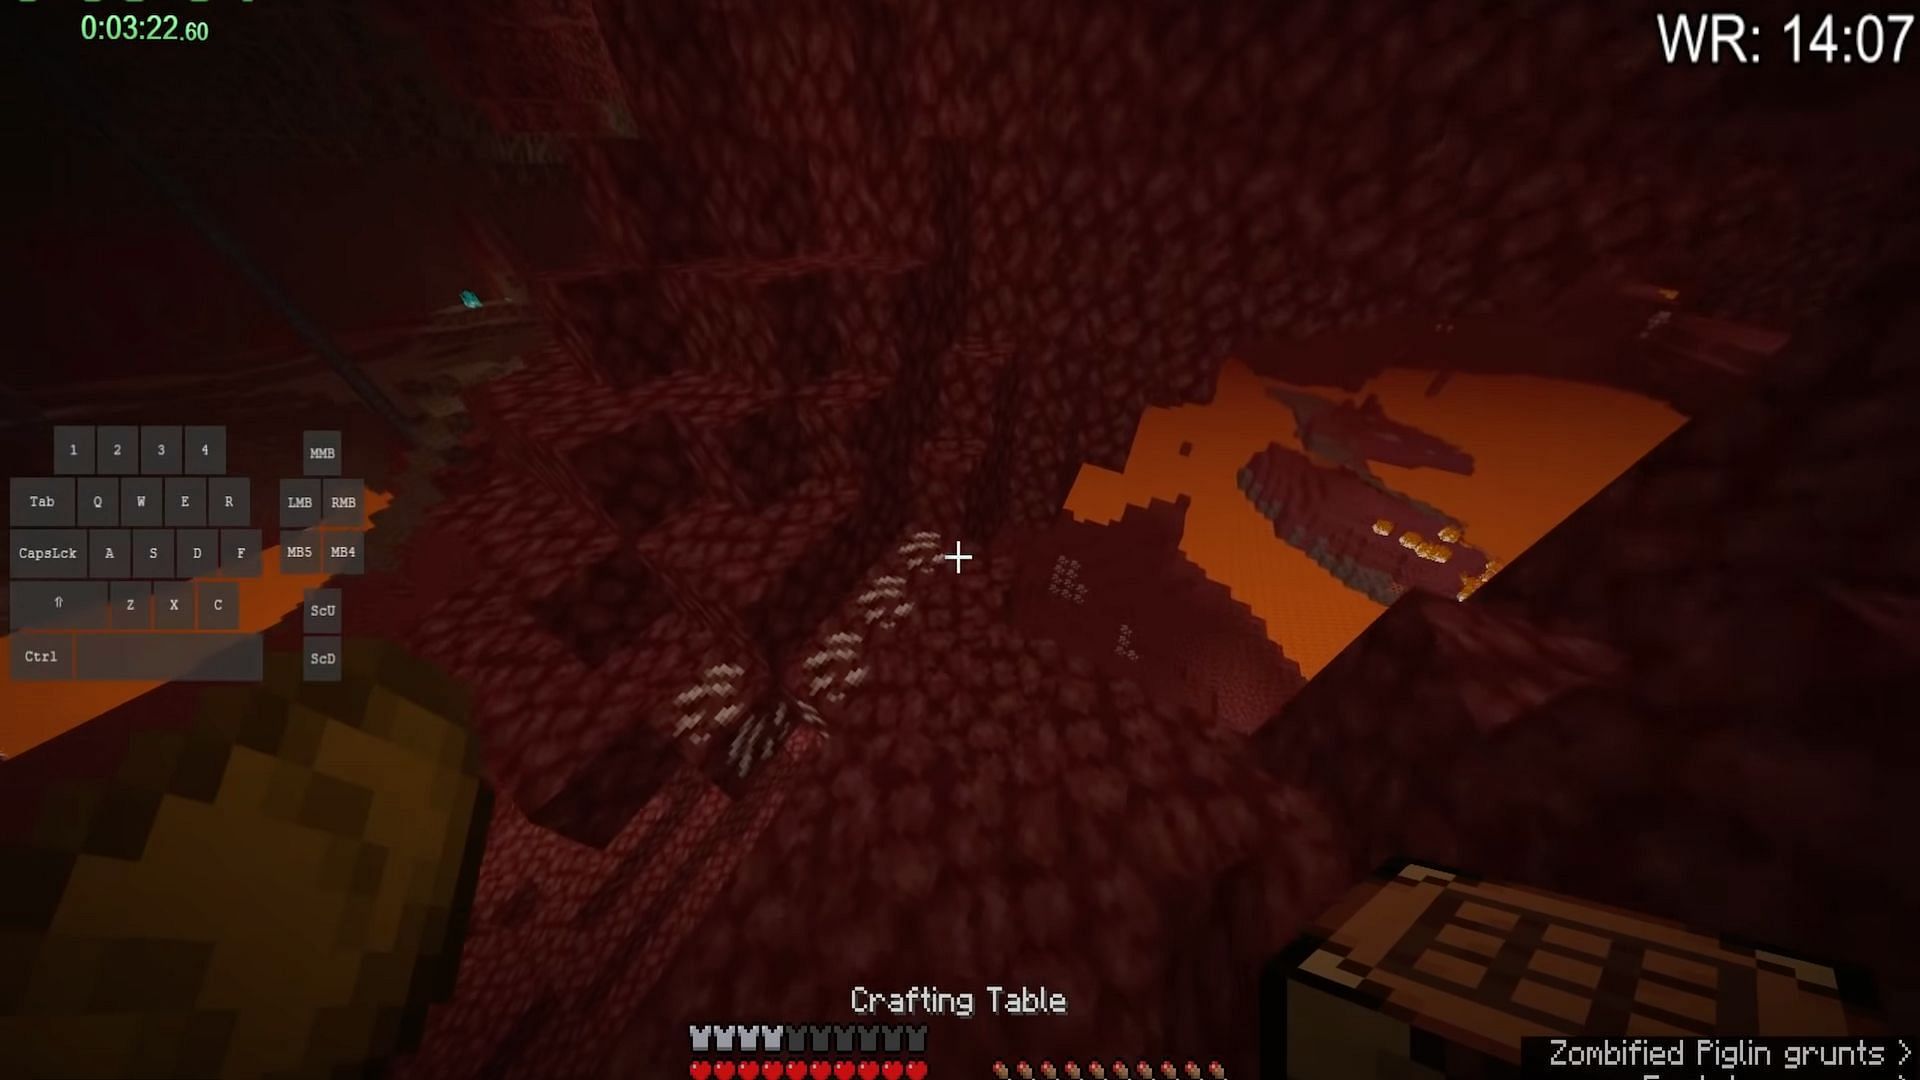 A simple Speedrunning trick to find a Nether Fortress